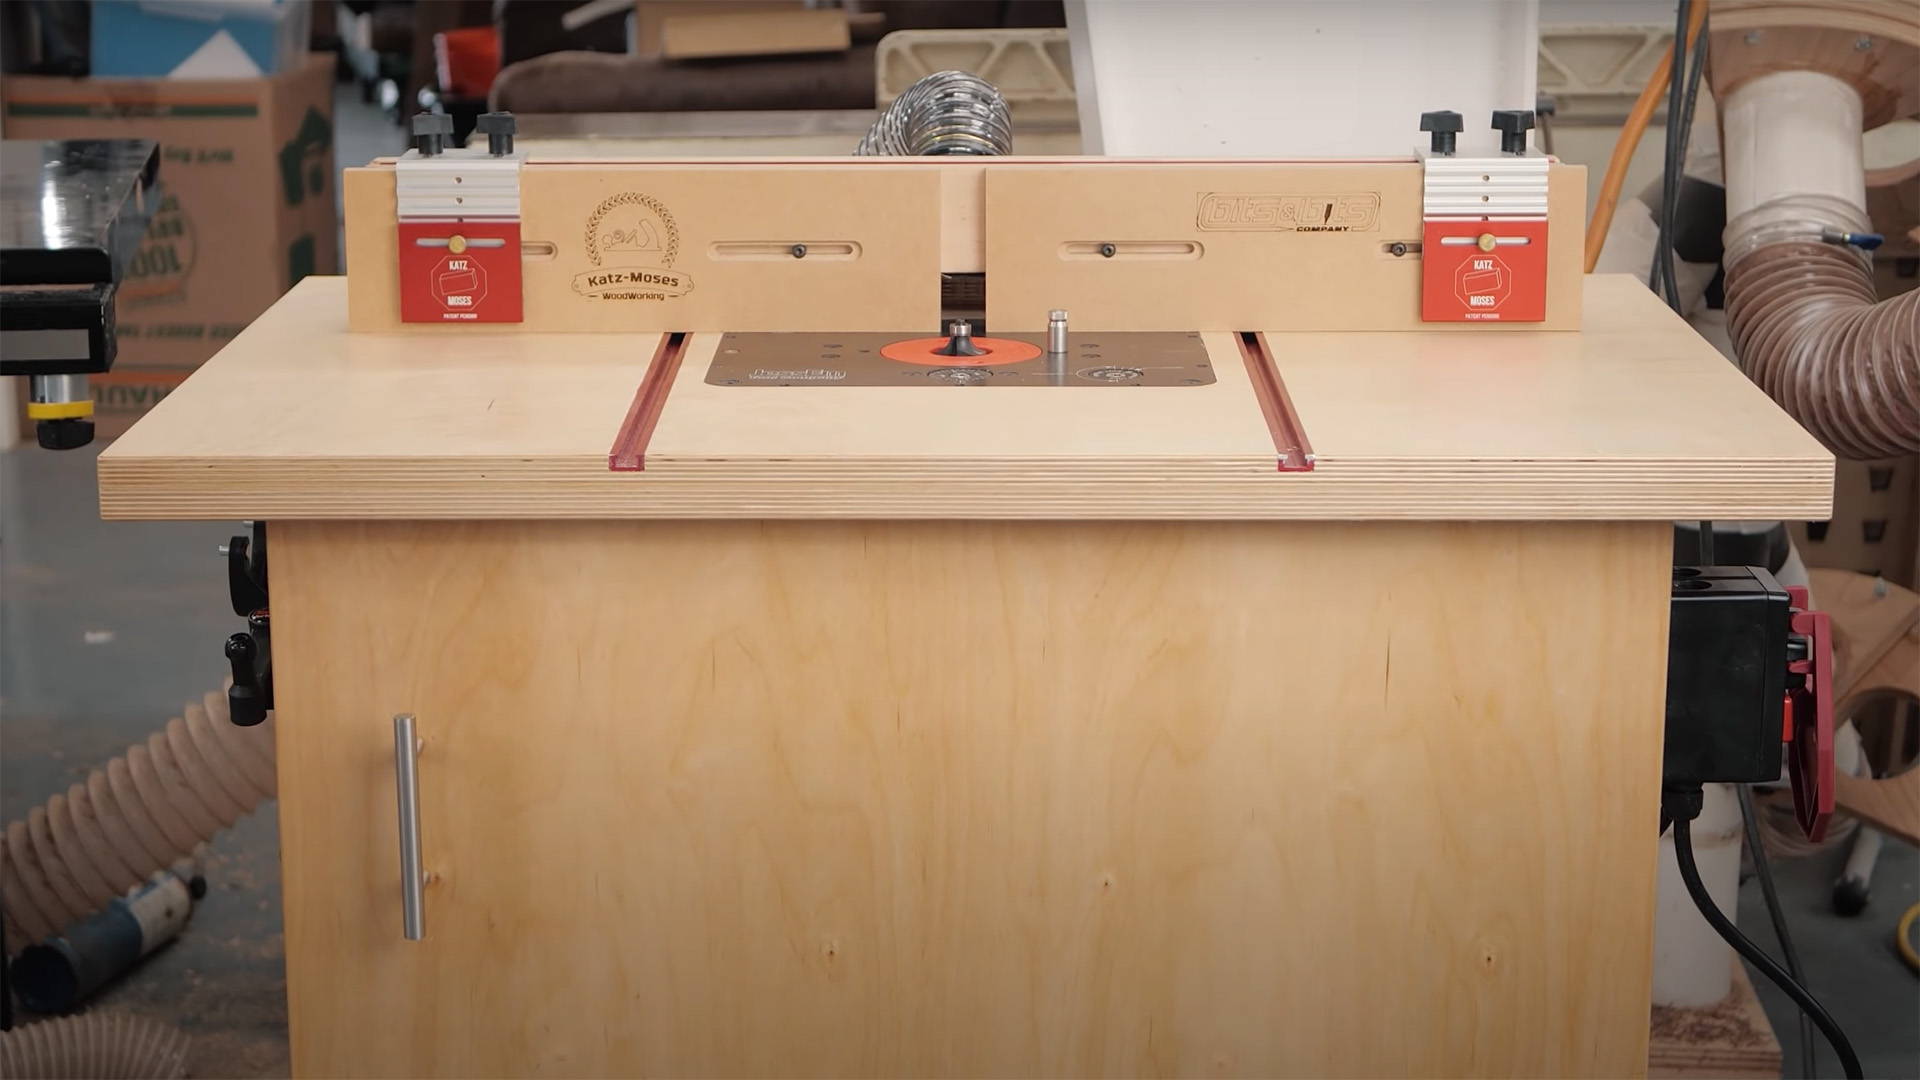 katz-moses router table